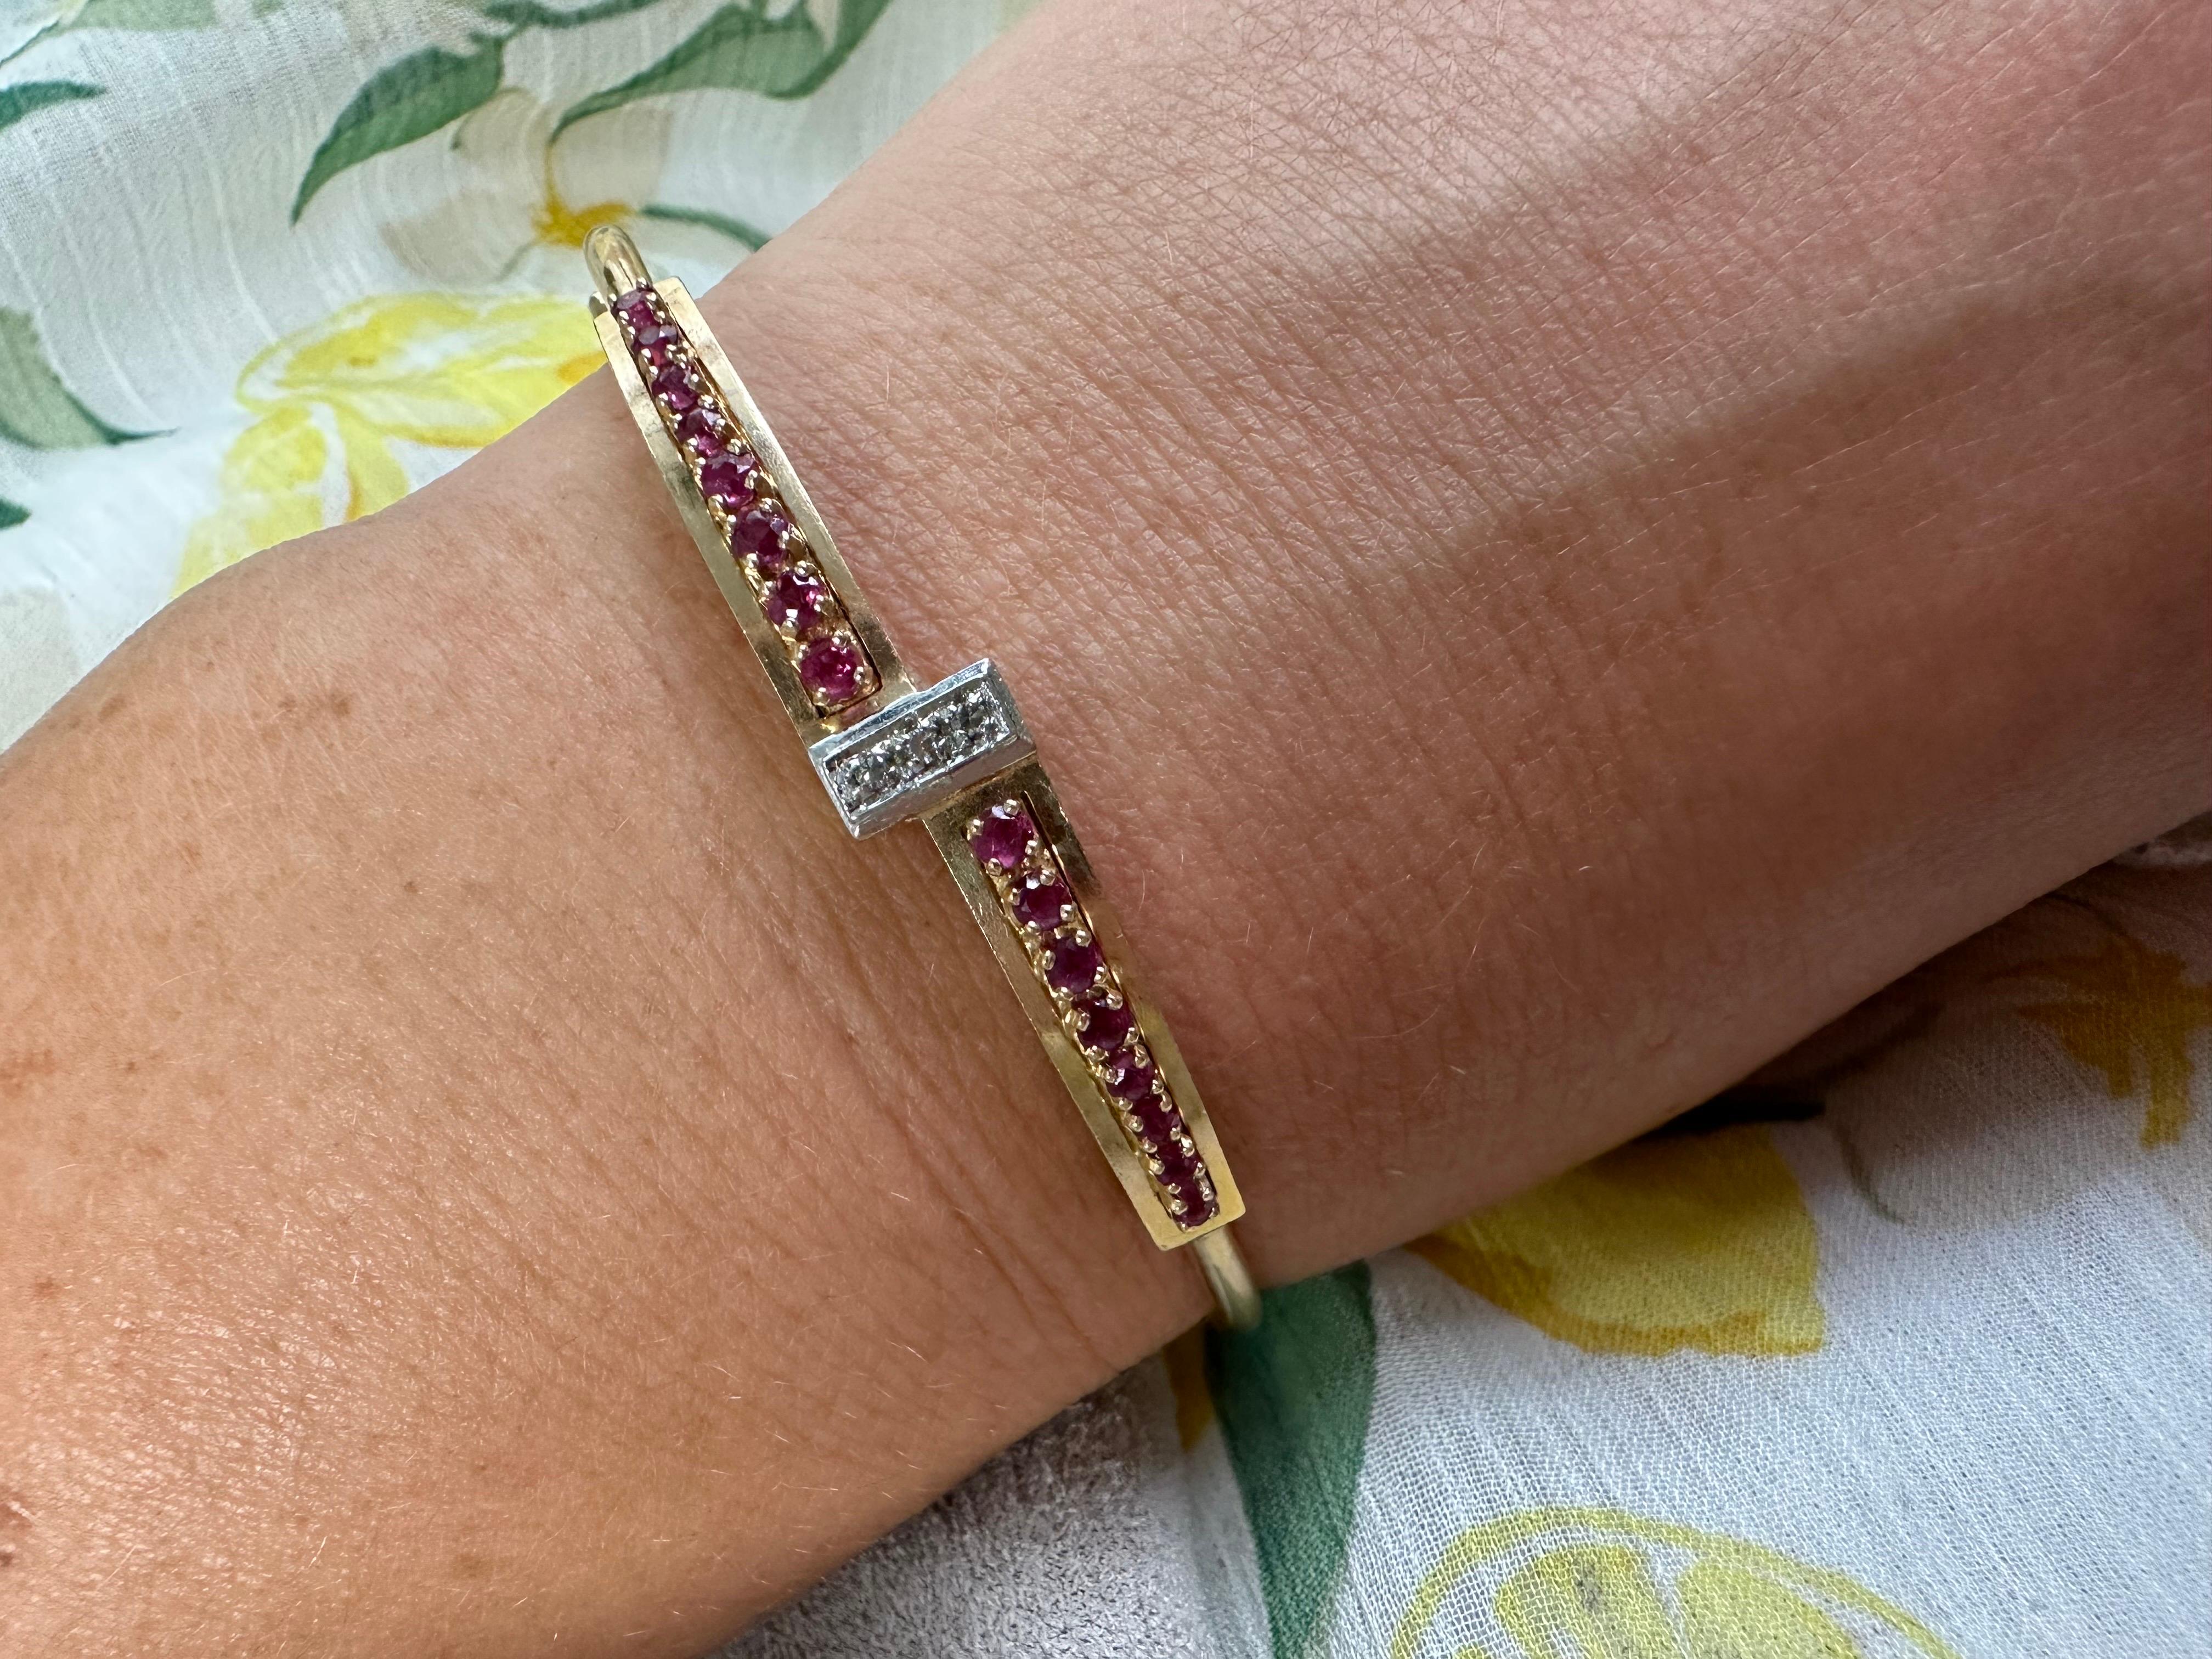 Diamond and Ruby bangle bracelet in 14KT yellow gold, beautiful and comfortable!

METAL: 14KT yellow gold
Grams:8.50
Item24000010 aft

WHAT YOU GET AT STAMPAR JEWELERS:
Stampar Jewelers, located in the heart of Jupiter, Florida, is a custom jewelry